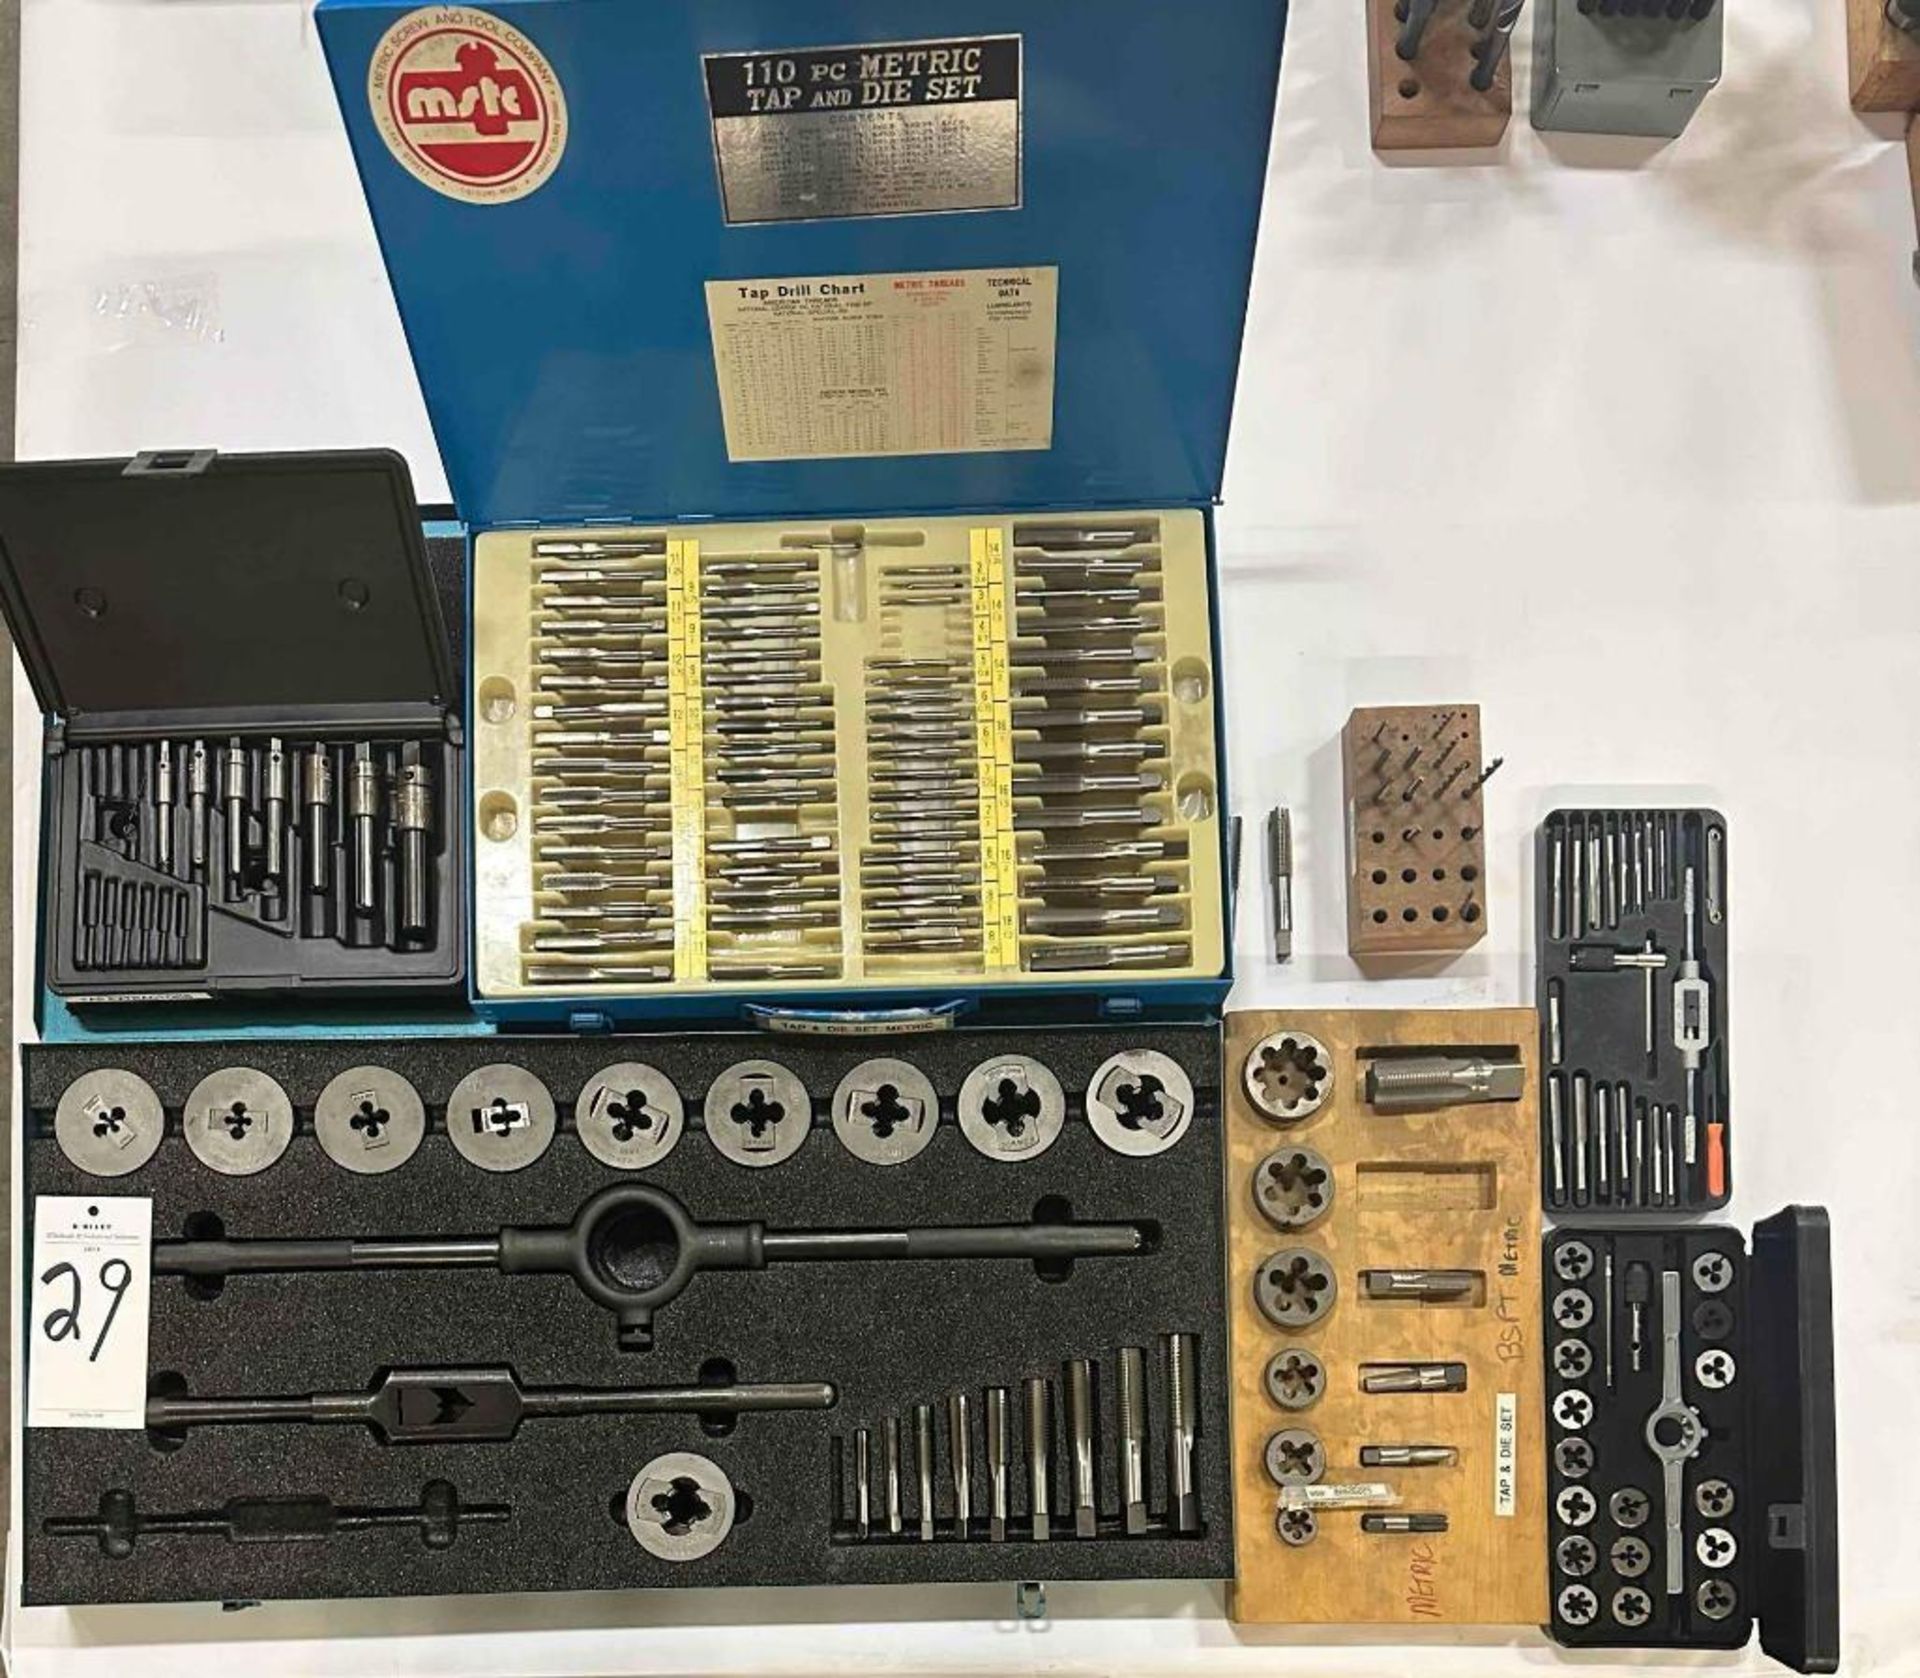 Assorted Metric Tap and Die Sets